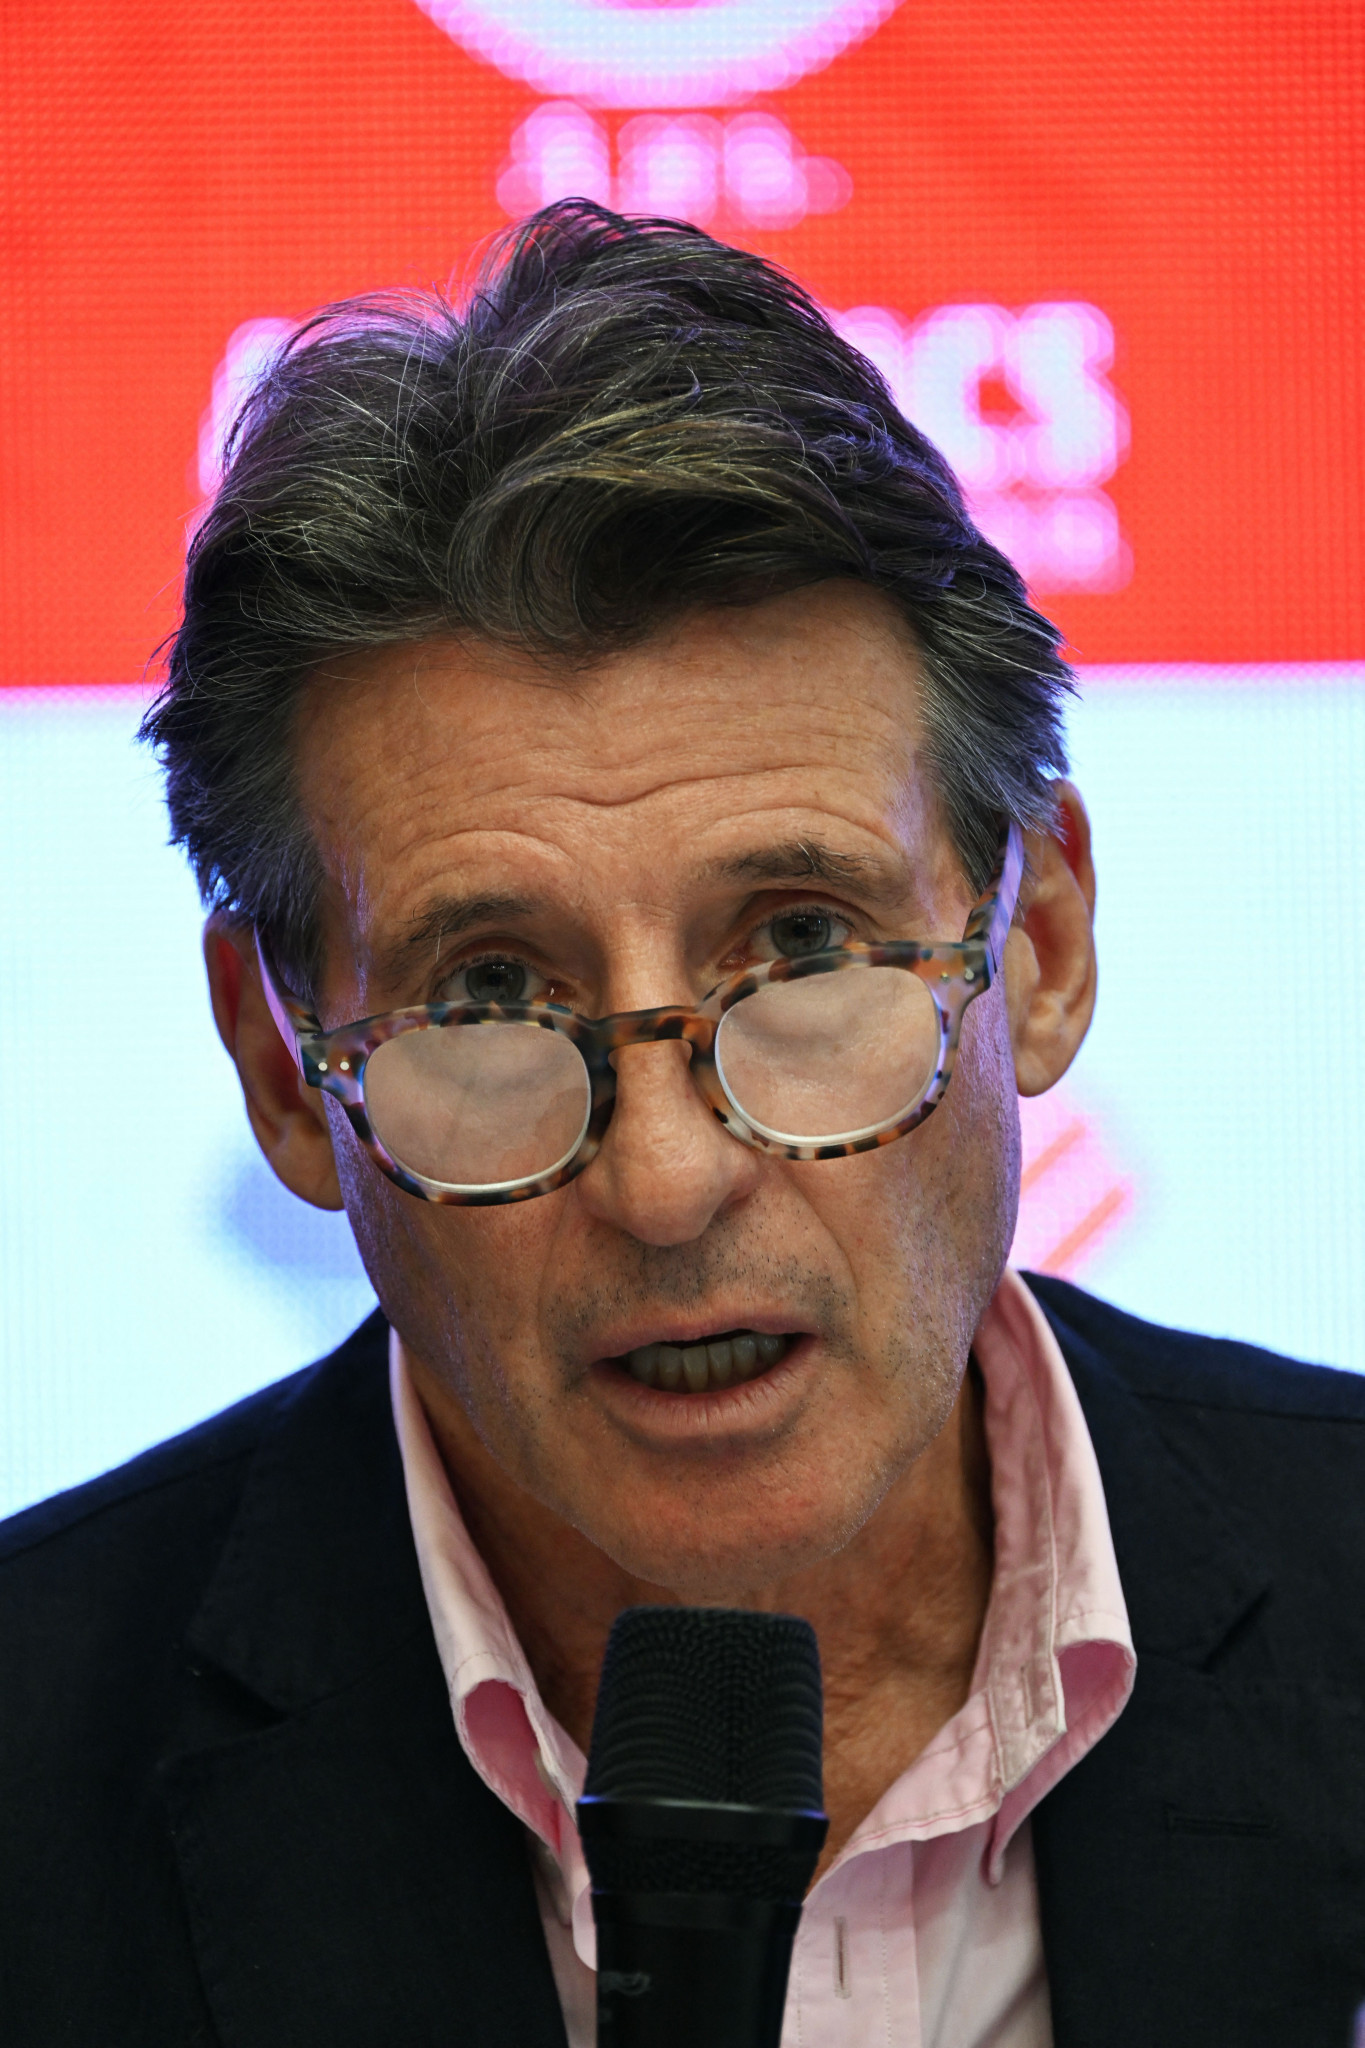 World Athletics President and IOC member Sebastian Coe discussed the growth of his sport in India on arrival in Mumbai ©Getty Images